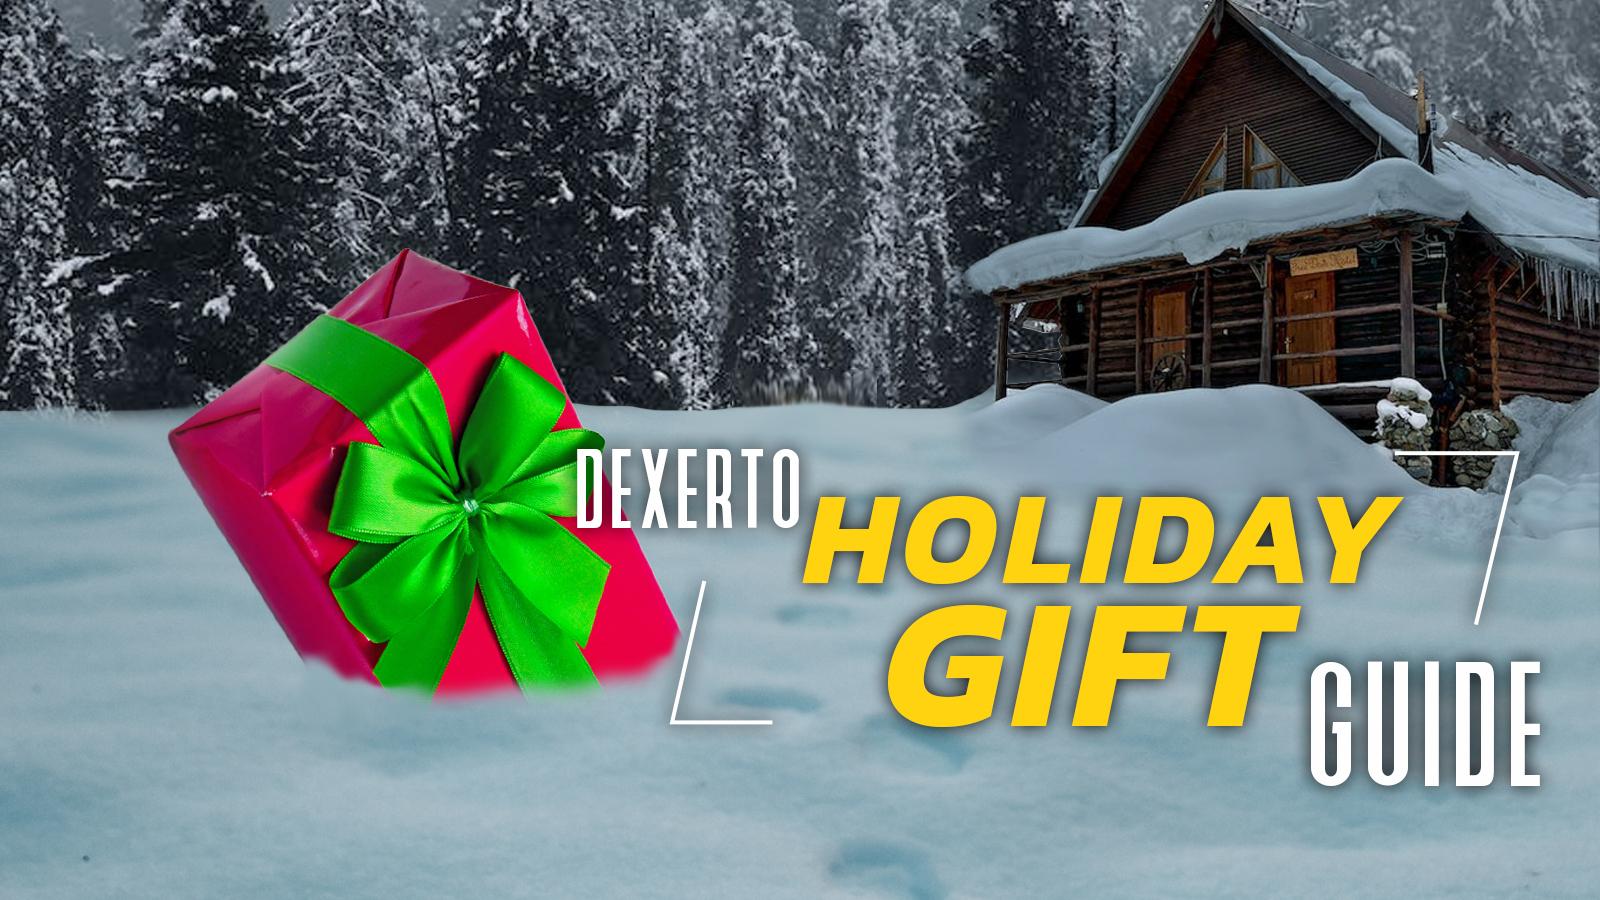 Dexerto Holiday Gift Guide